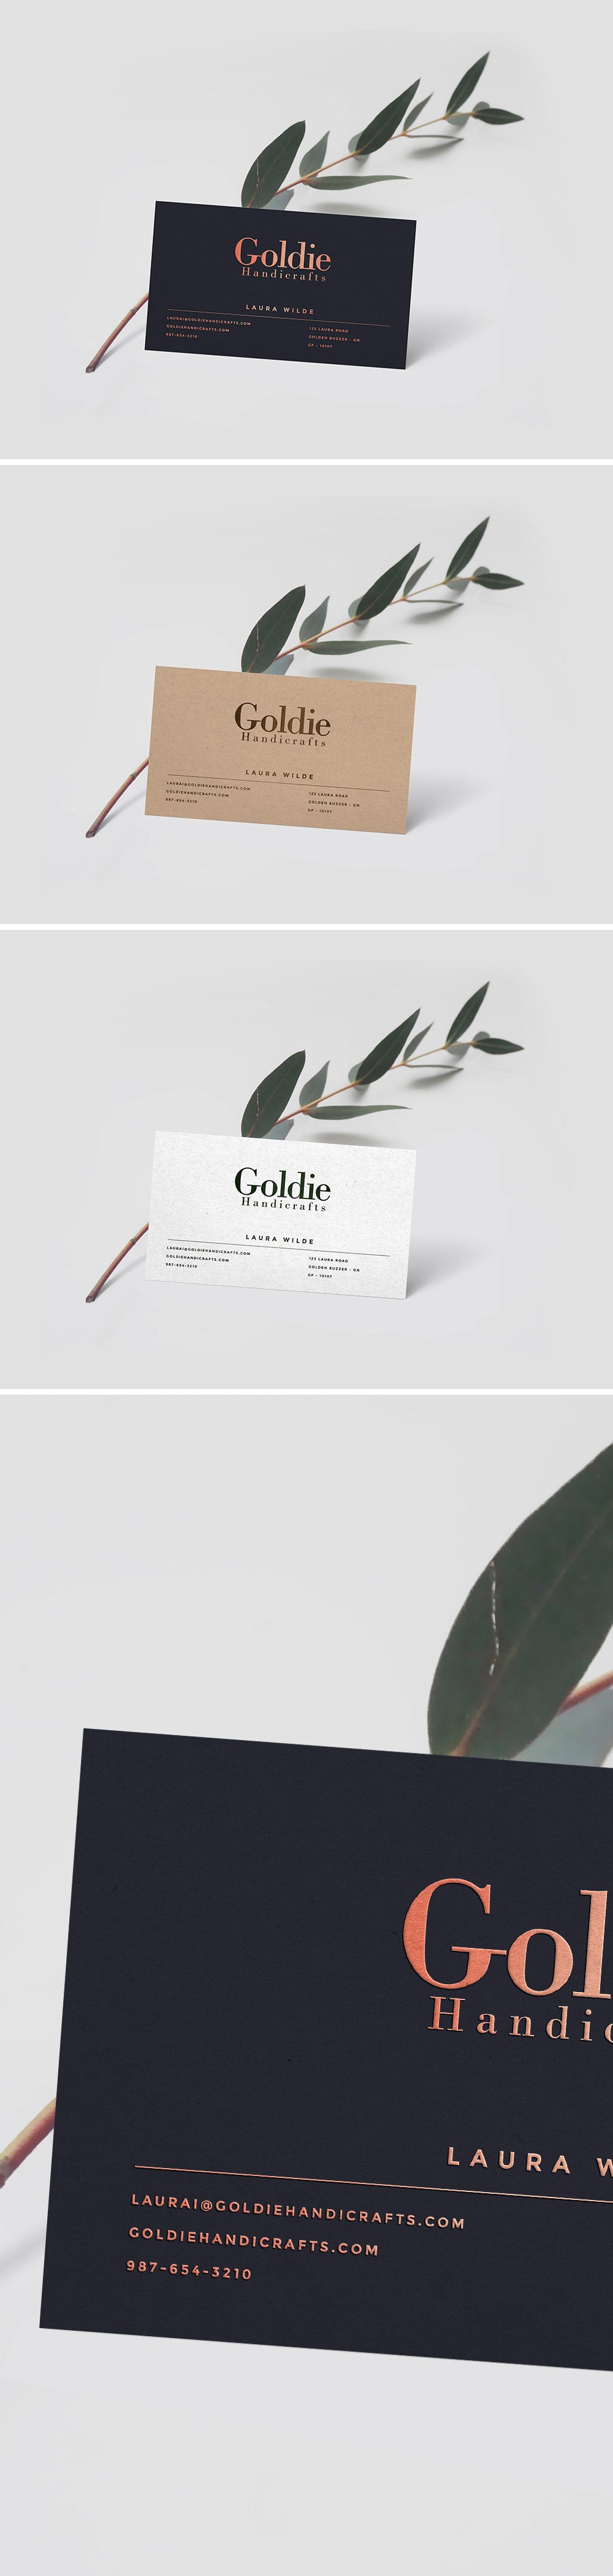 Free Realistic Business Card Mockup PSD with Leaf